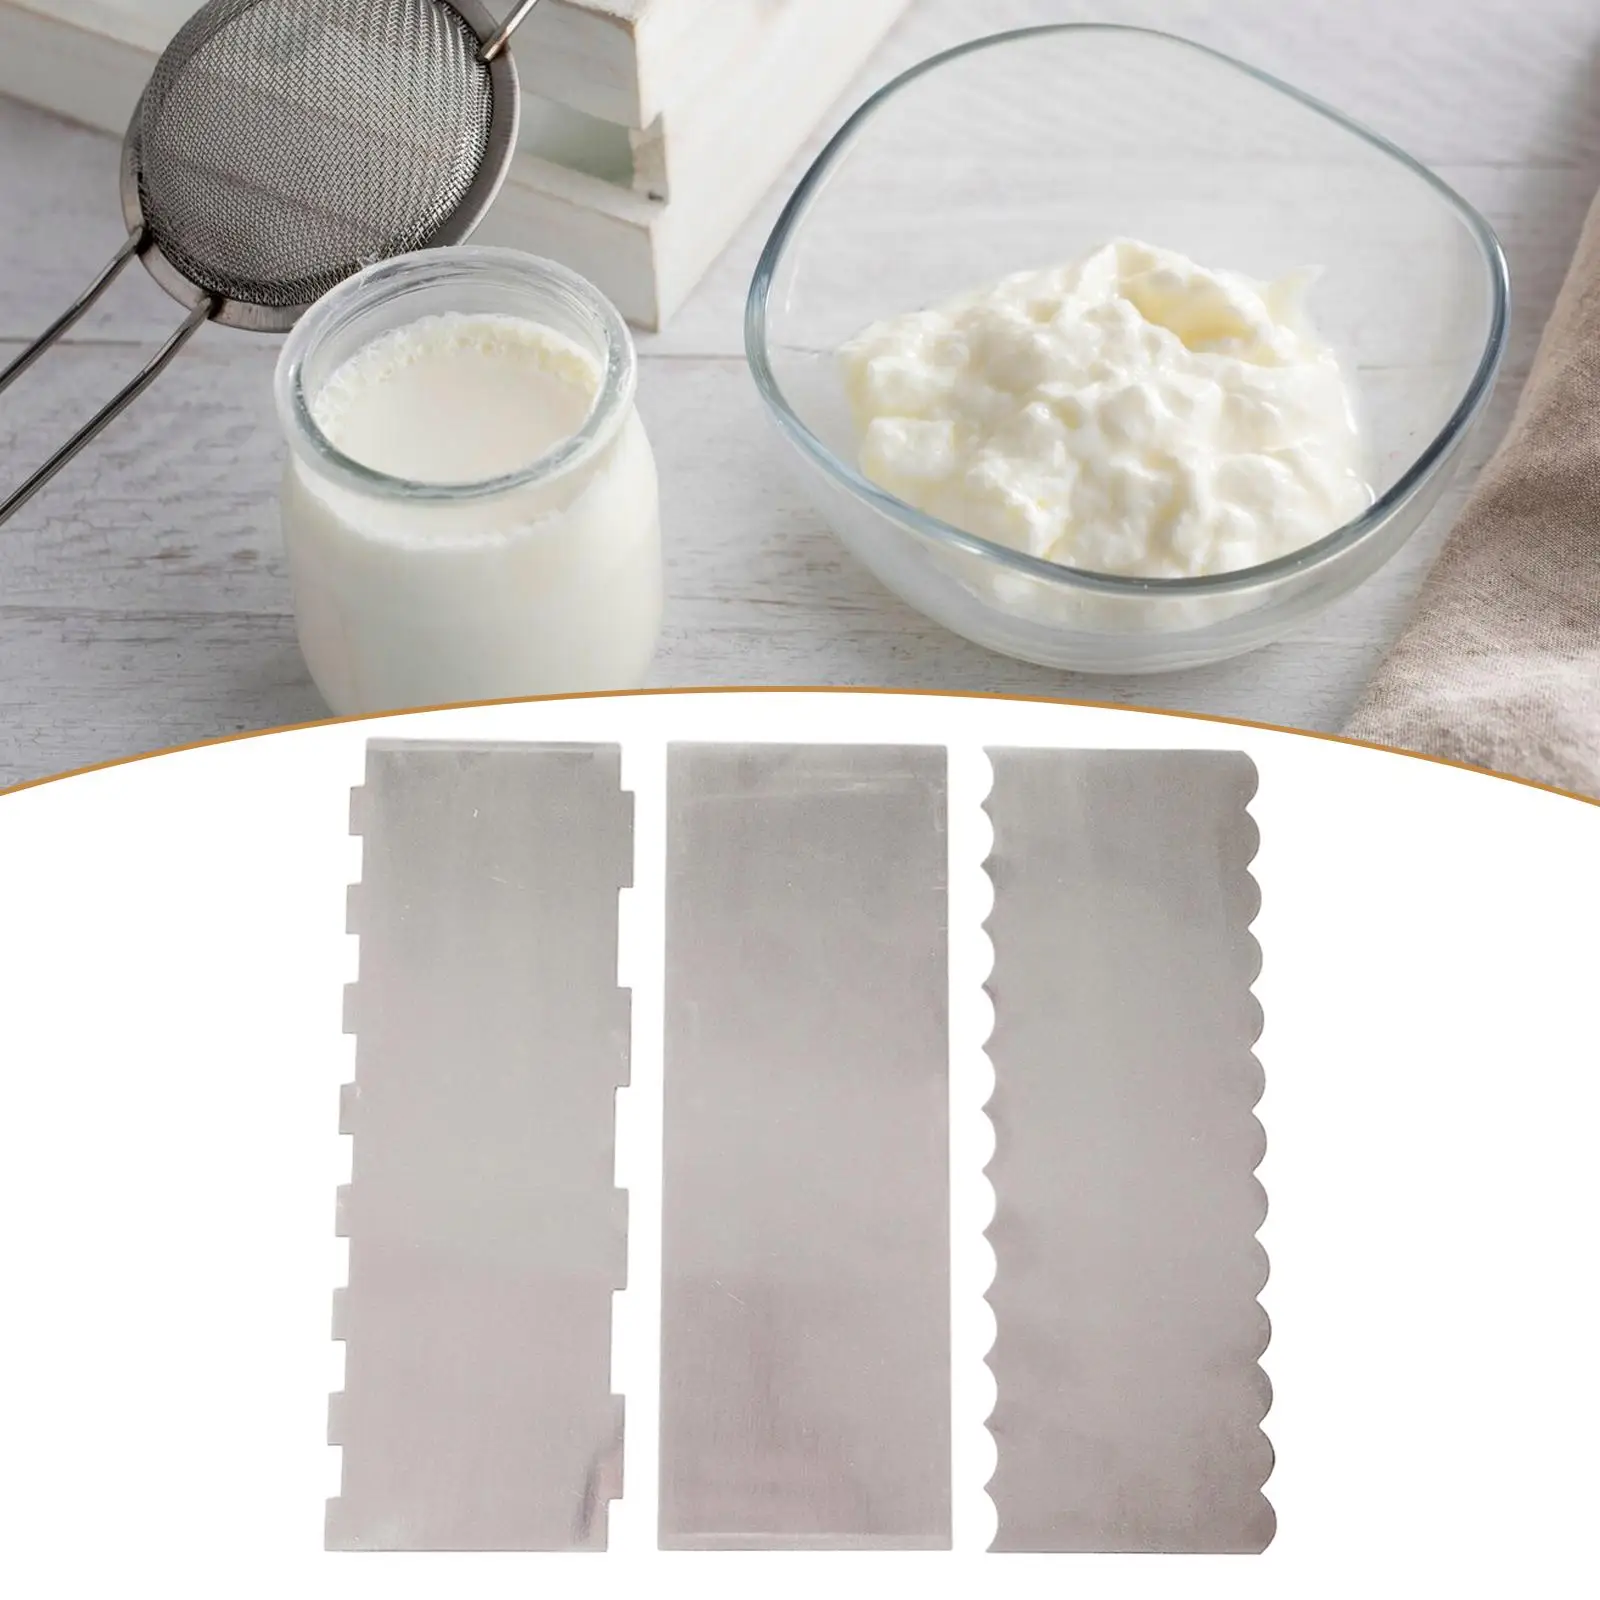 3 Pieces Cake Scraper DIY Cake Leveling Device Icing Frosting Cream Edge Mousse Steel Cake Decorating Comb Cake Decorating Tool